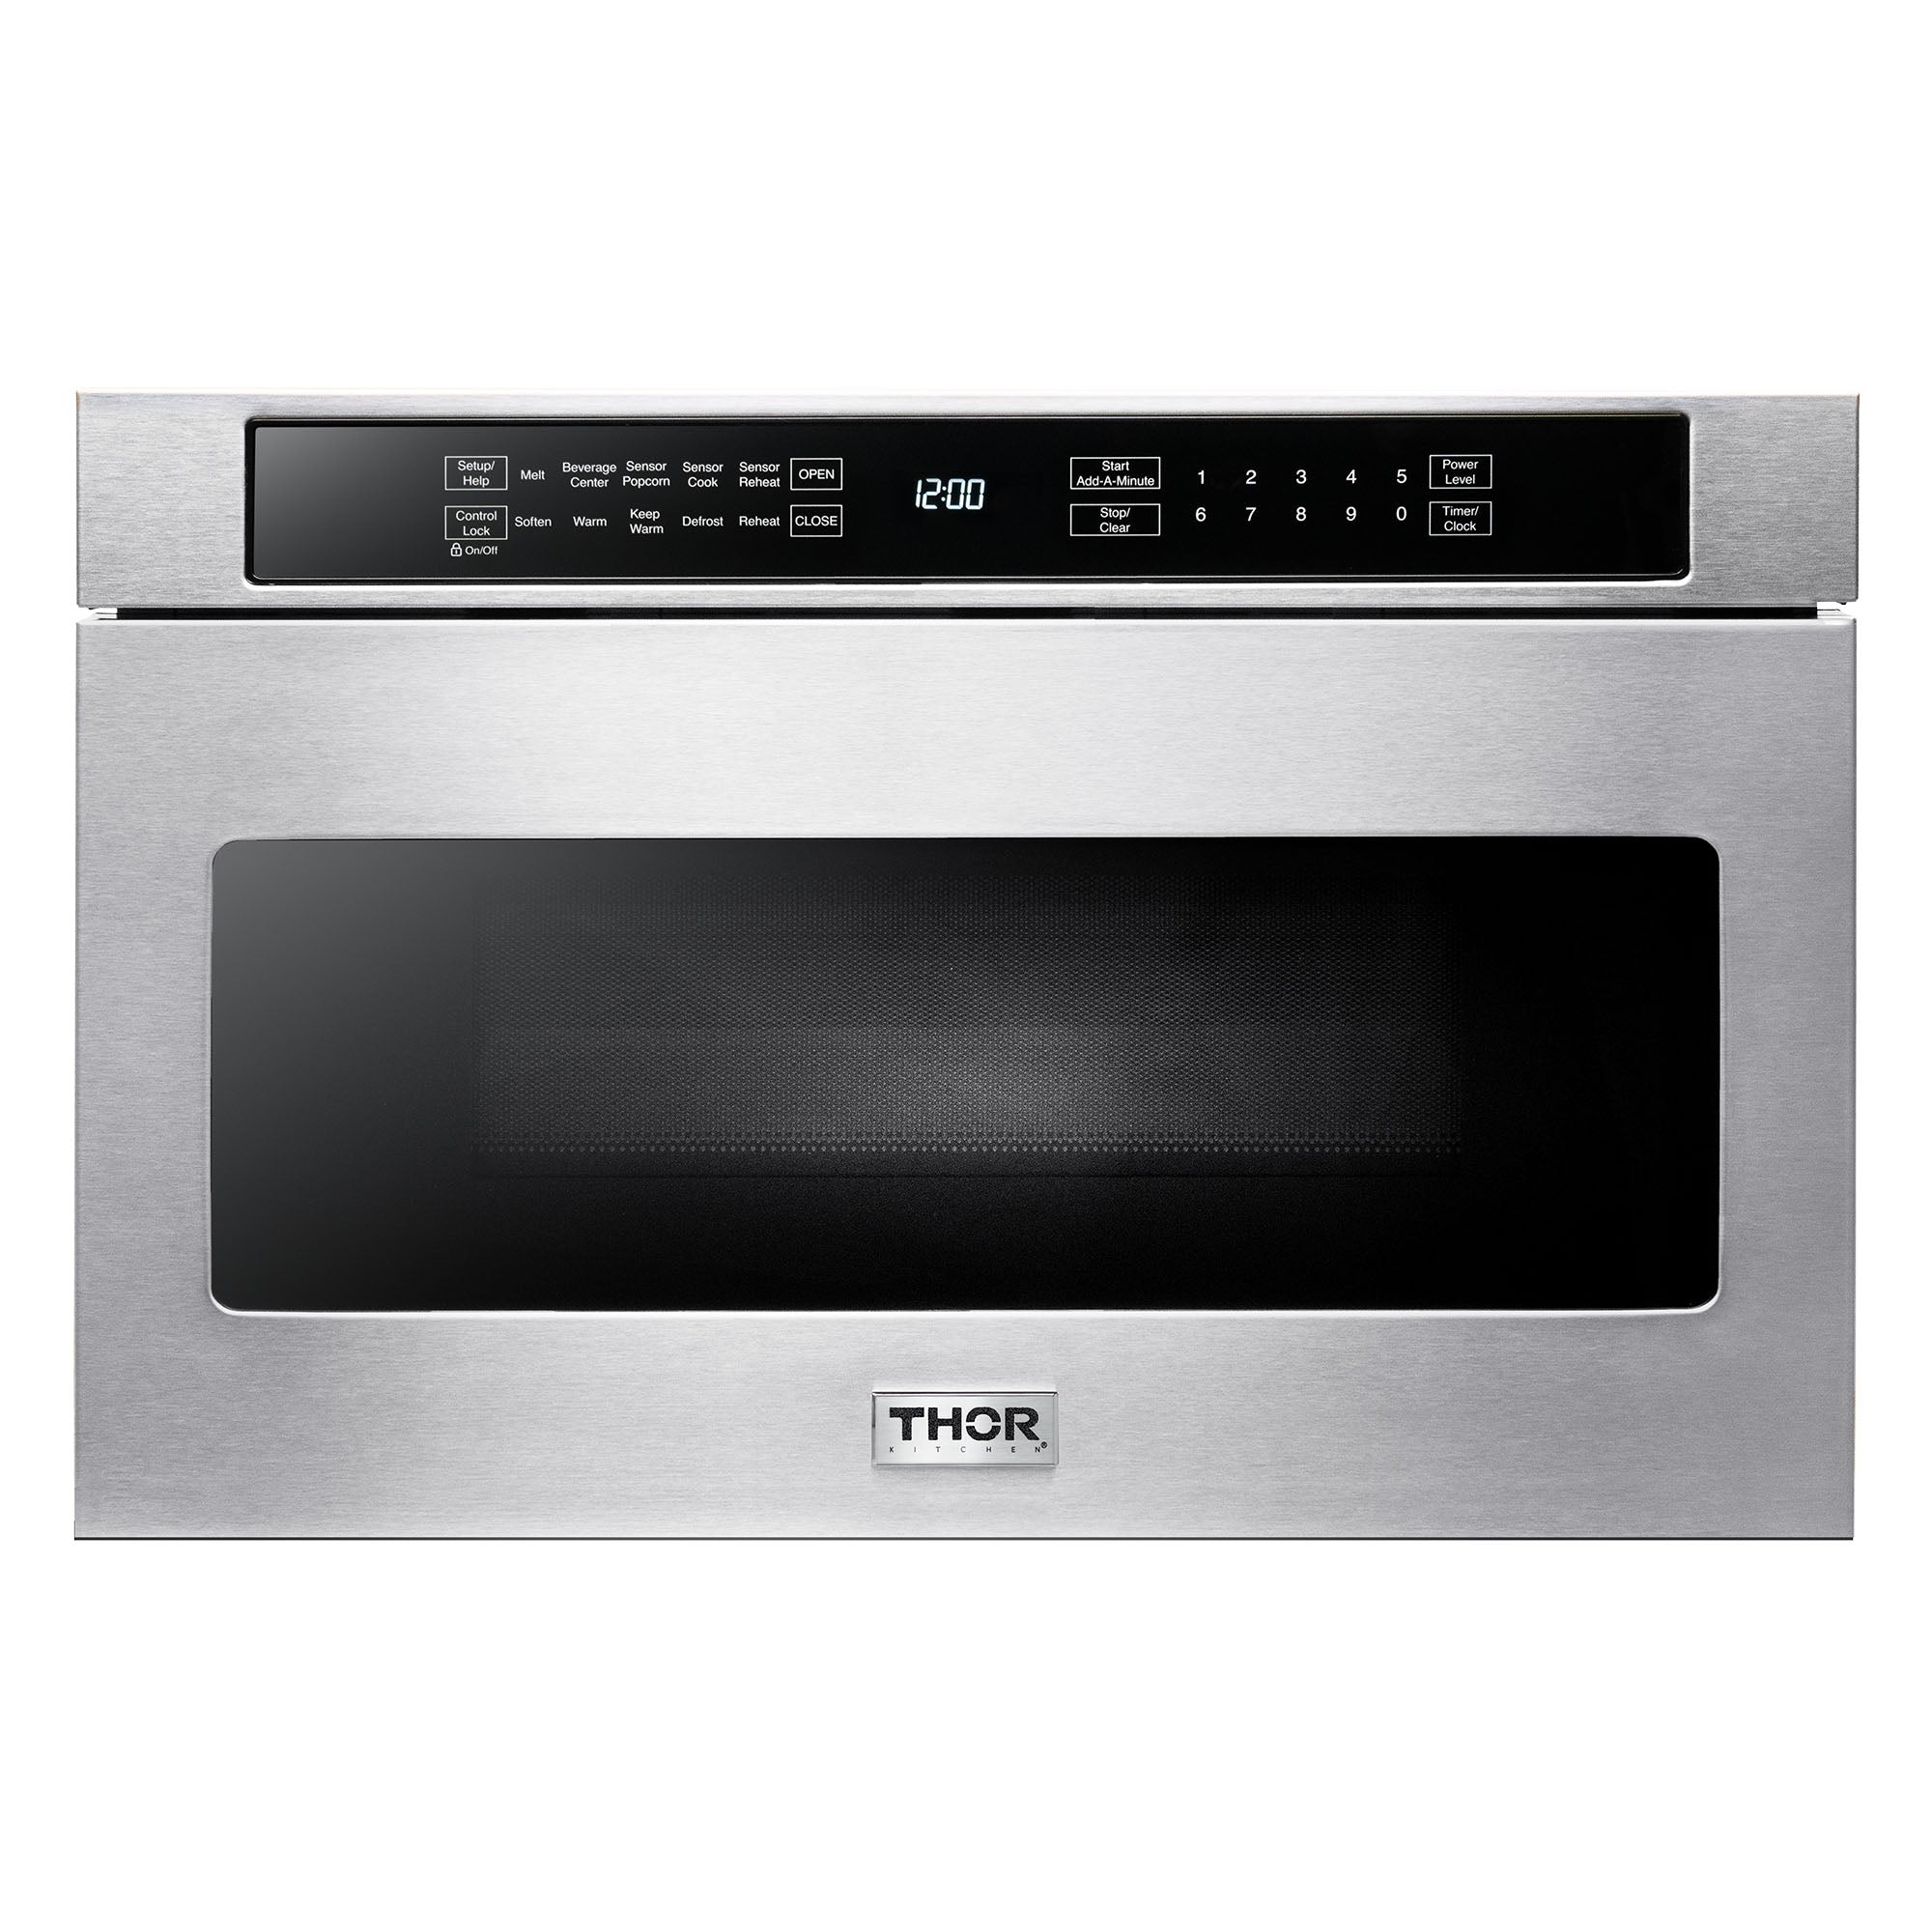 Thor Kitchen 24" 1.2 Cu. Ft. Microwave Drawer In Stainless Steel, TMD2401